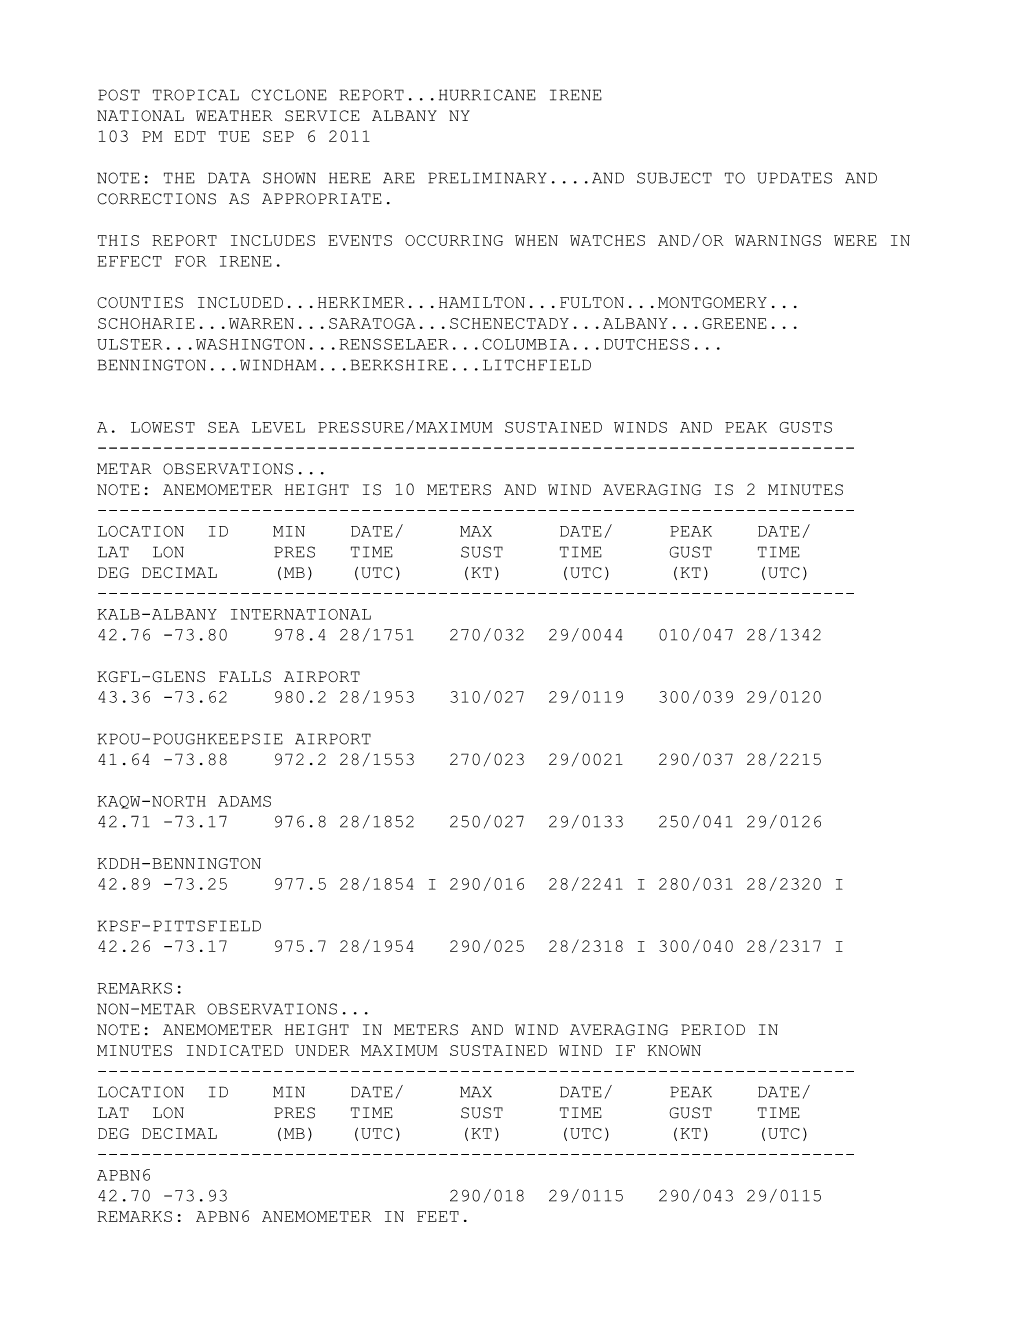 Post Tropical Cyclone Report...Hurricane Irene National Weather Service Albany Ny 103 Pm Edt Tue Sep 6 2011